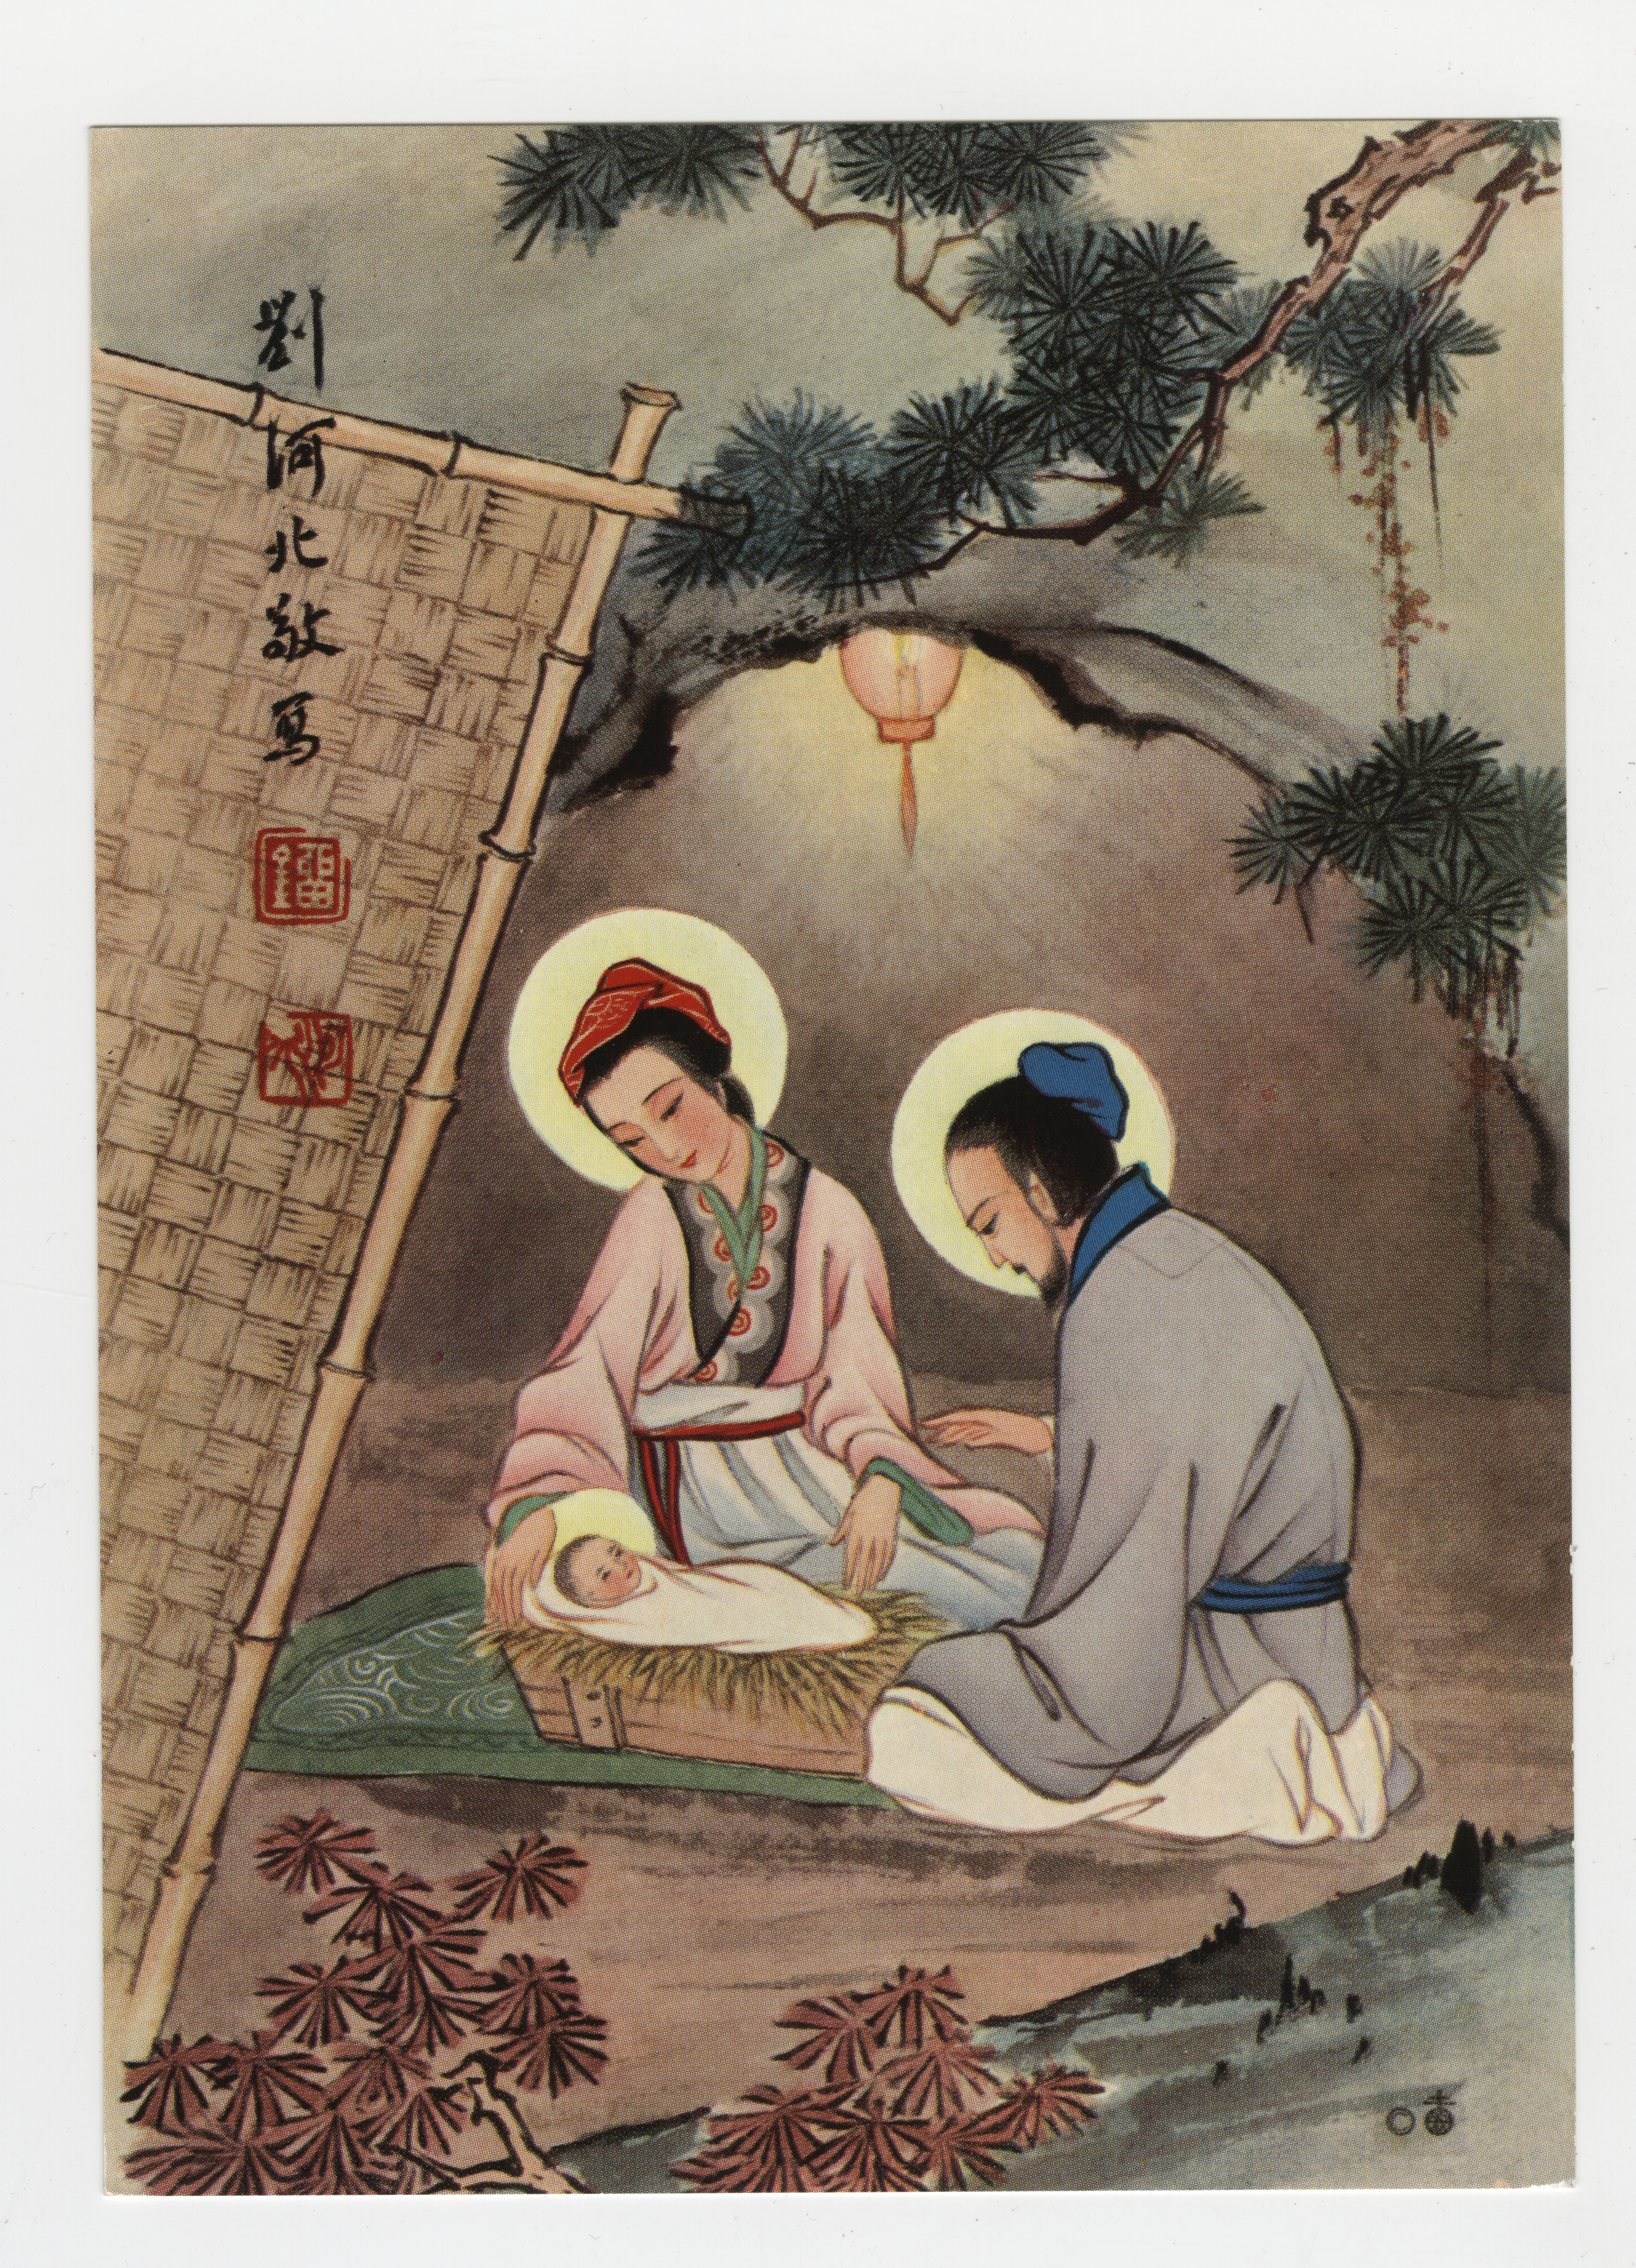 Late 20th-century postcard featuring the Holy Family from China. The artist is unknown.